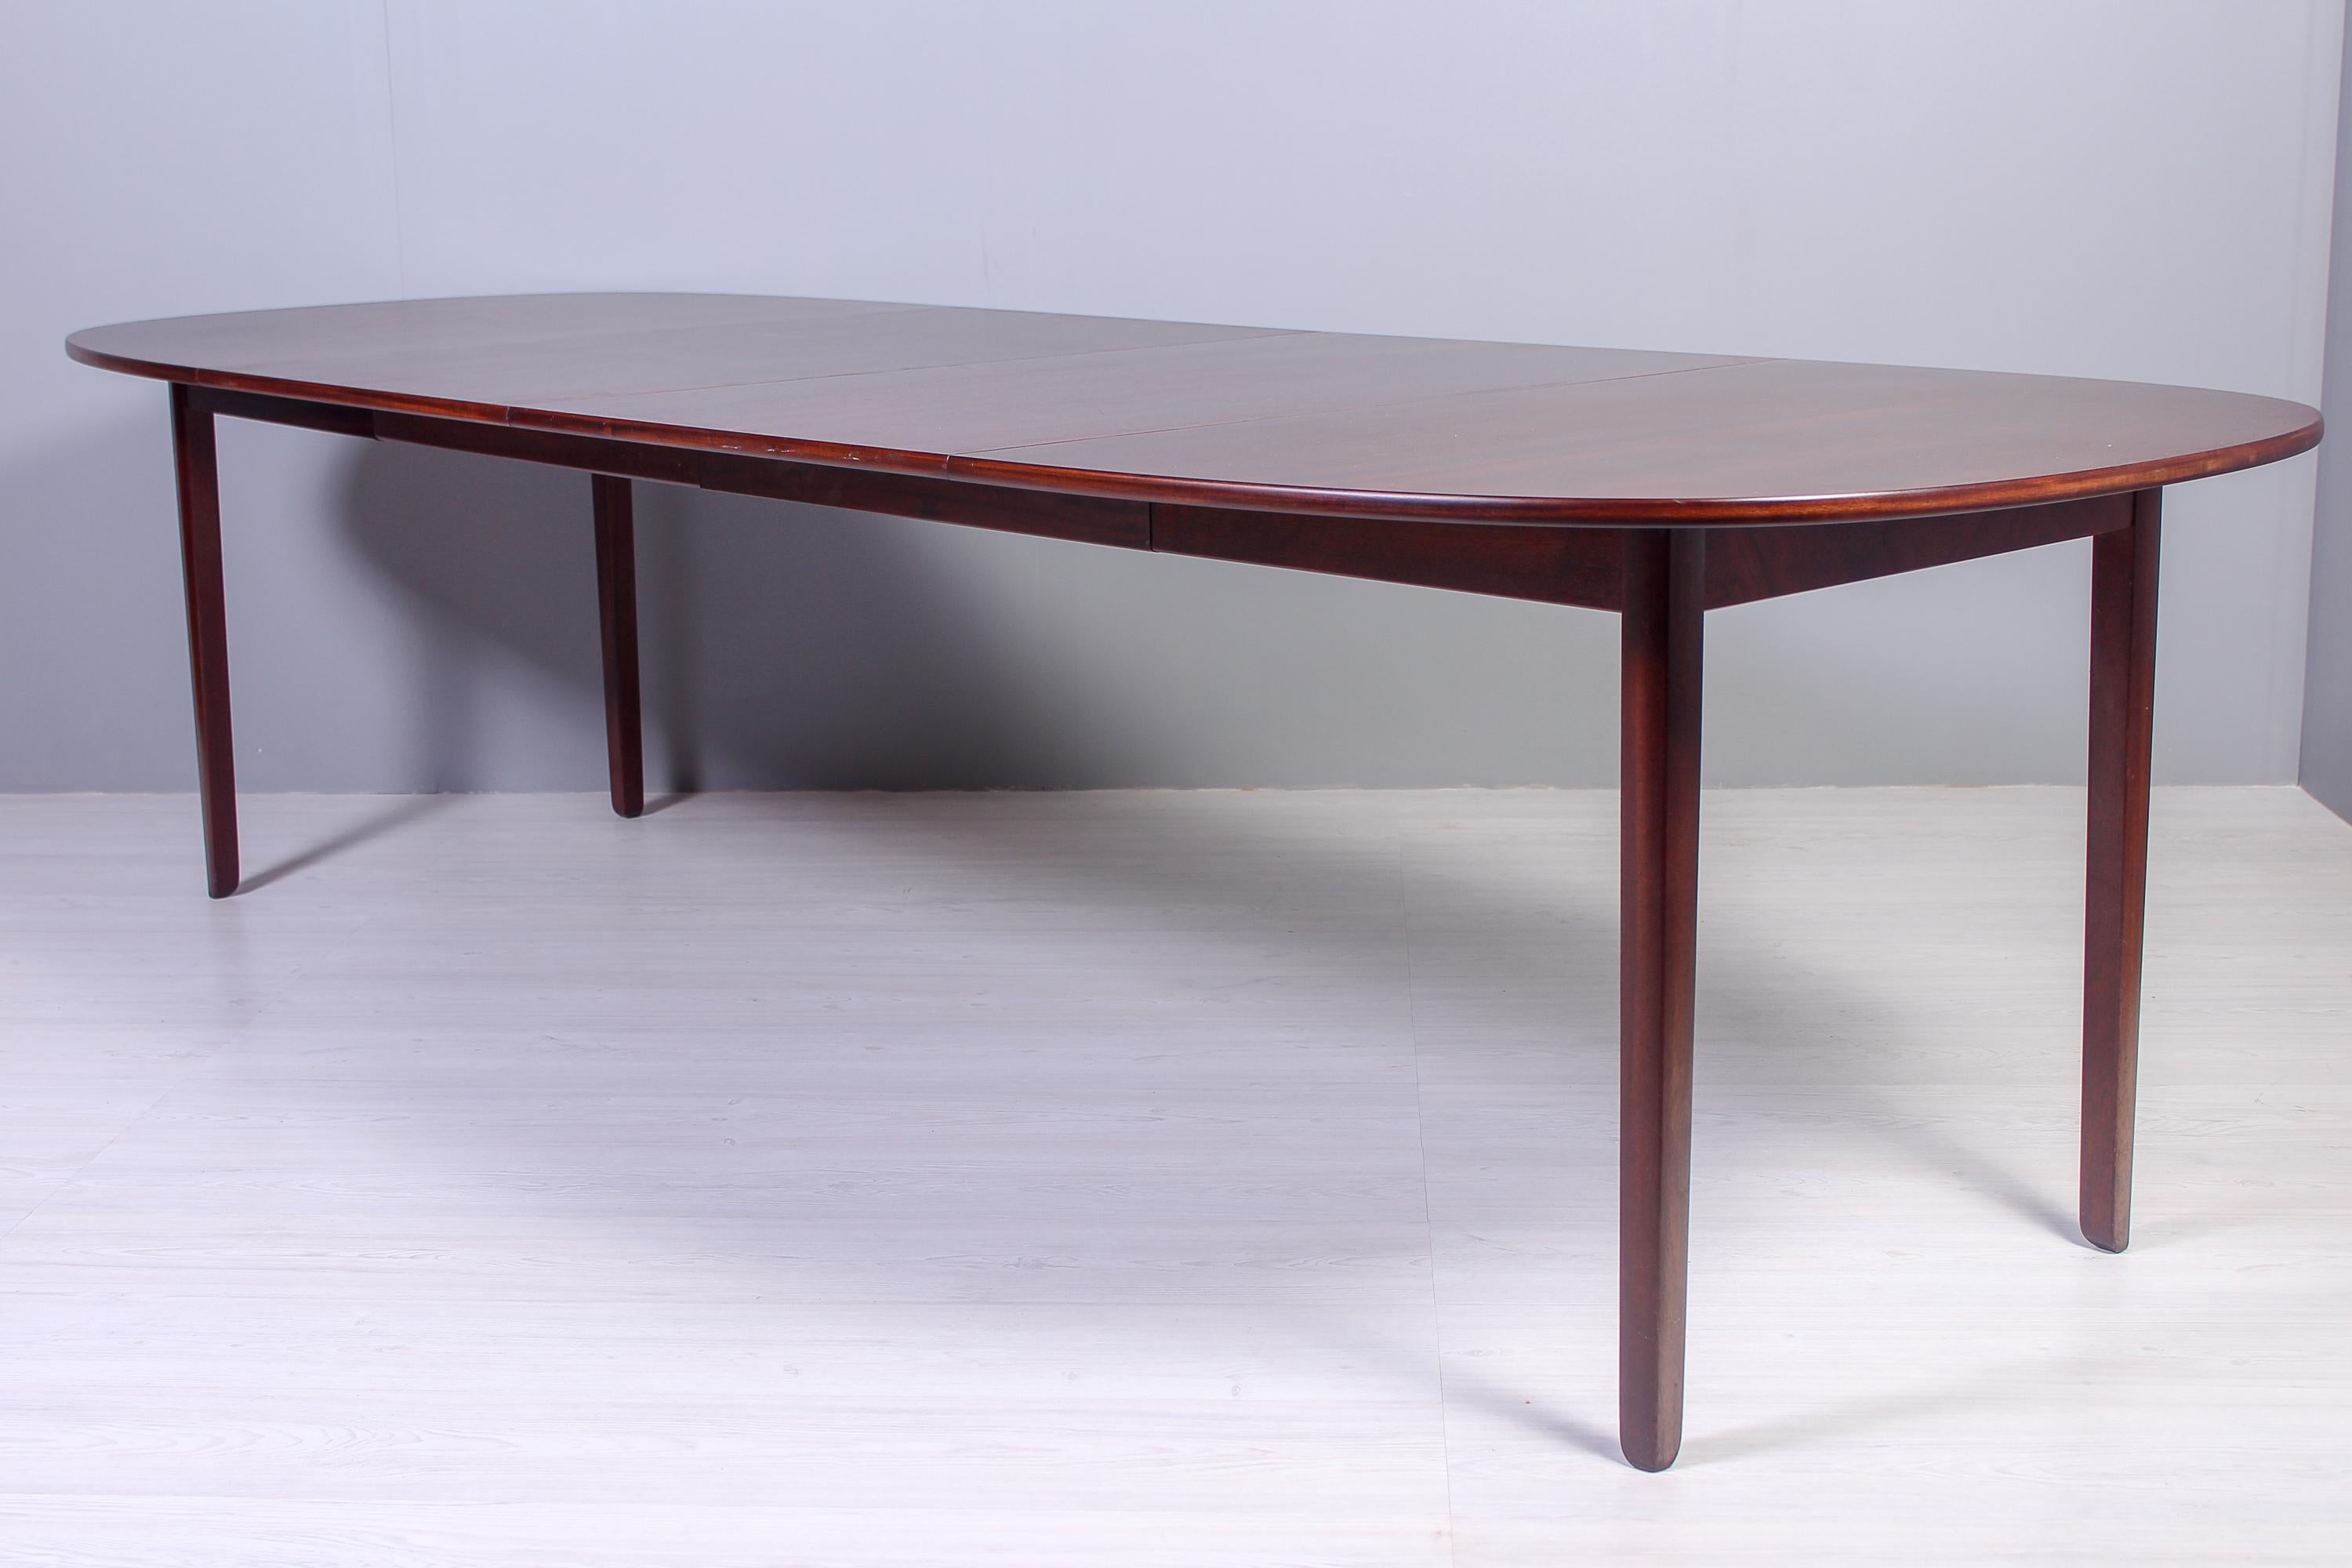 Ole Wanscher Mahogany Rungstedlund Dining Table, 1960s For Sale 3